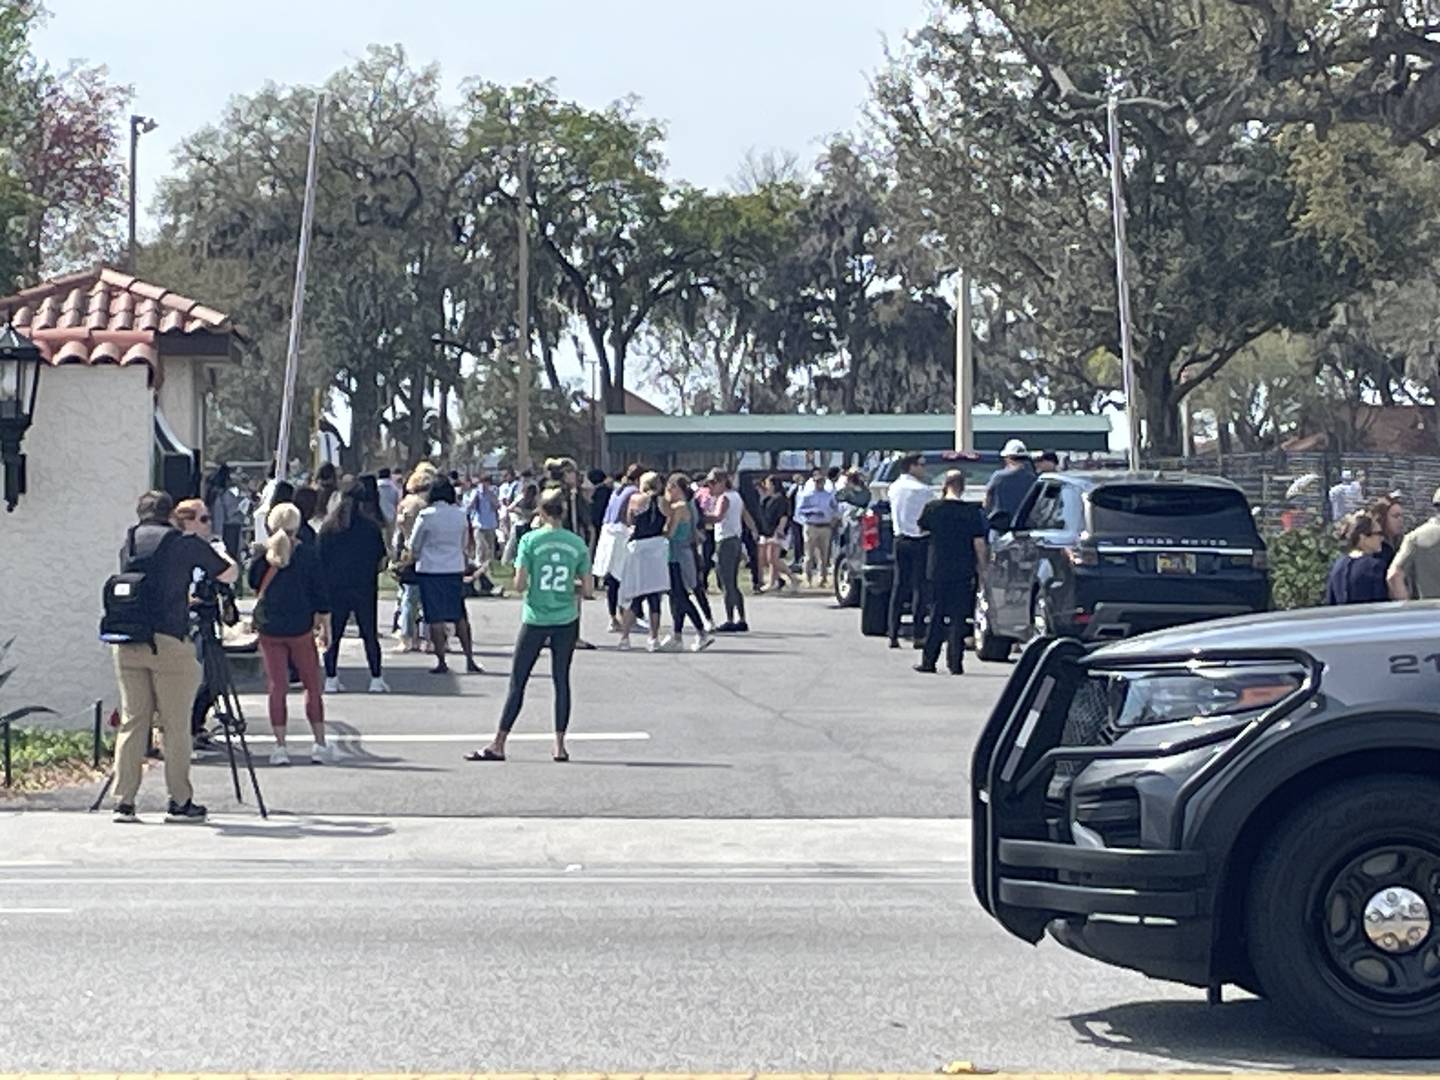 The Bolles School sent an "emergency alert" on its San Jose and Whitehurst campuses. The school sent a message to families saying that the Jacksonville Sheriff’s Office “is not allowing anyone” on those campuses at this time.